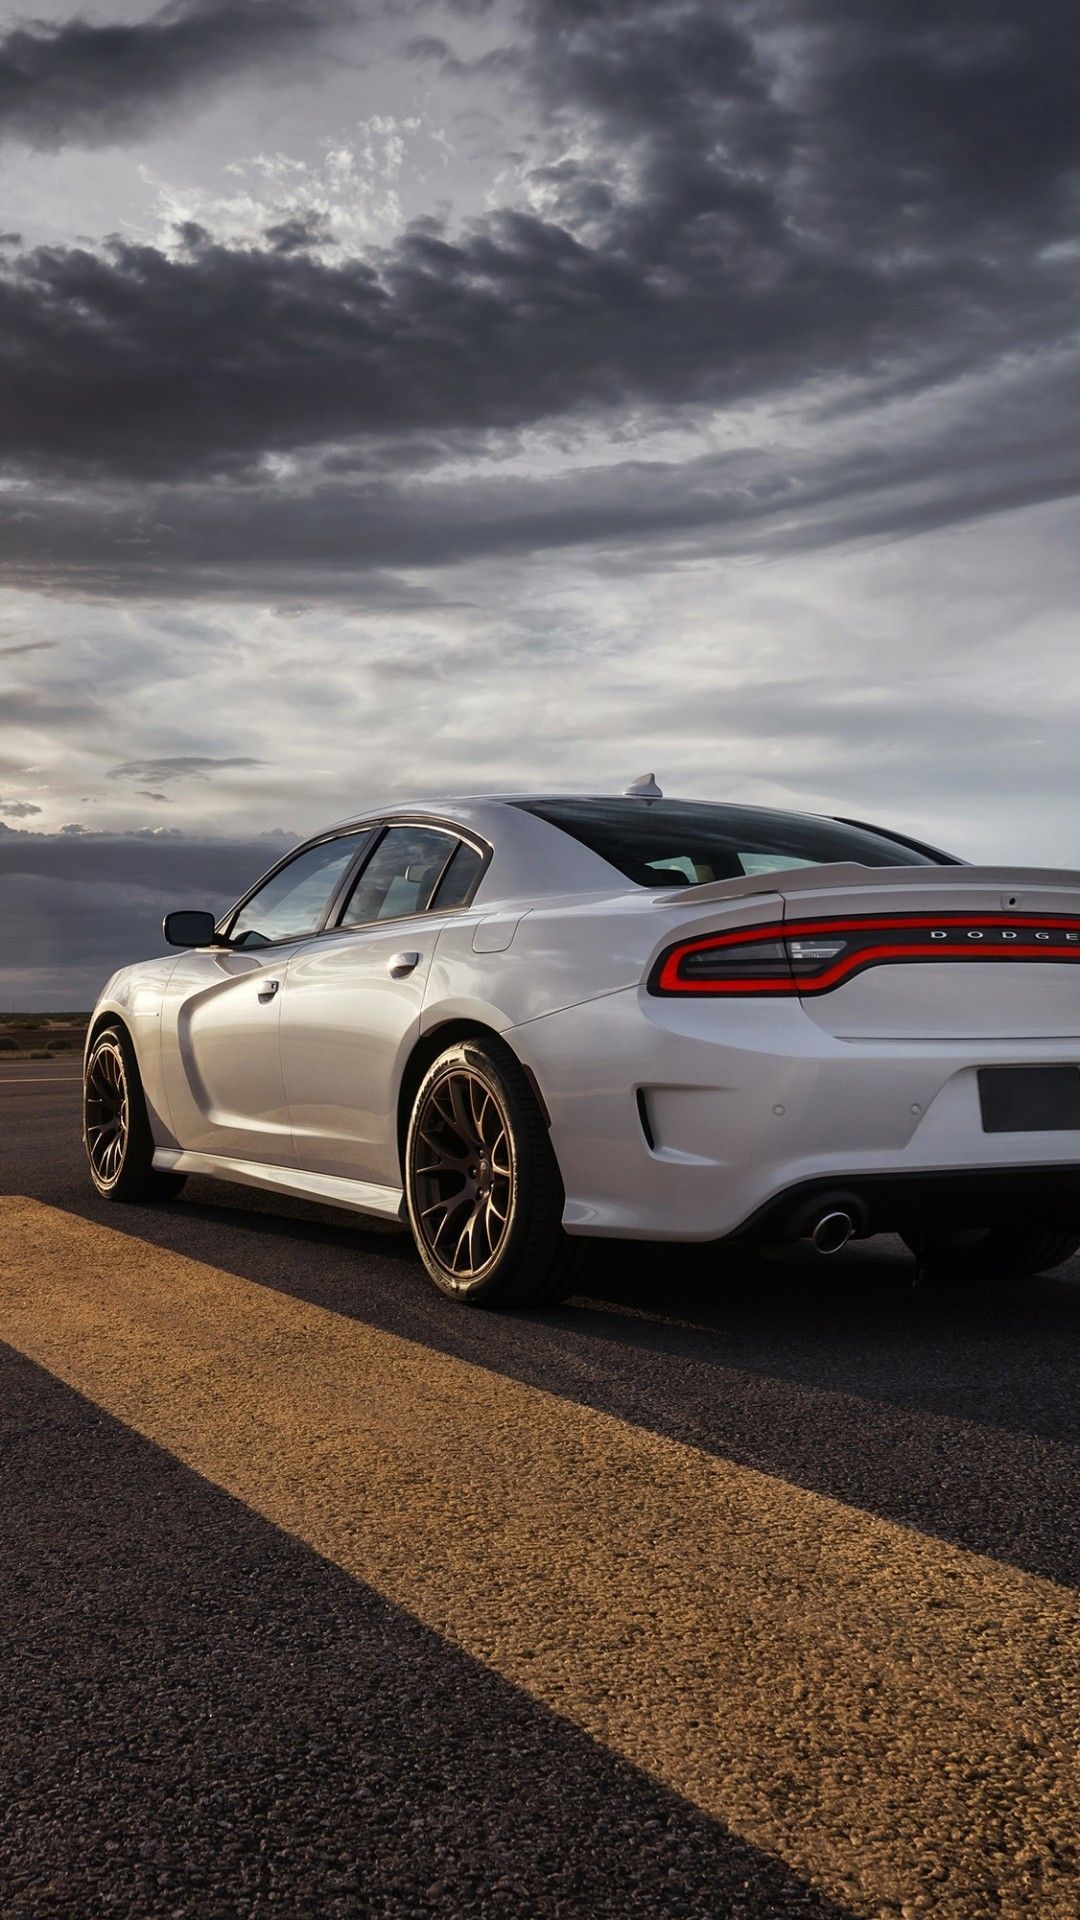 Dodge Charger Wallpaper 1 Signs You're In Love With Dodge Charger Wallpaper. Dodge charger, Dodge charger hellcat, Charger srt